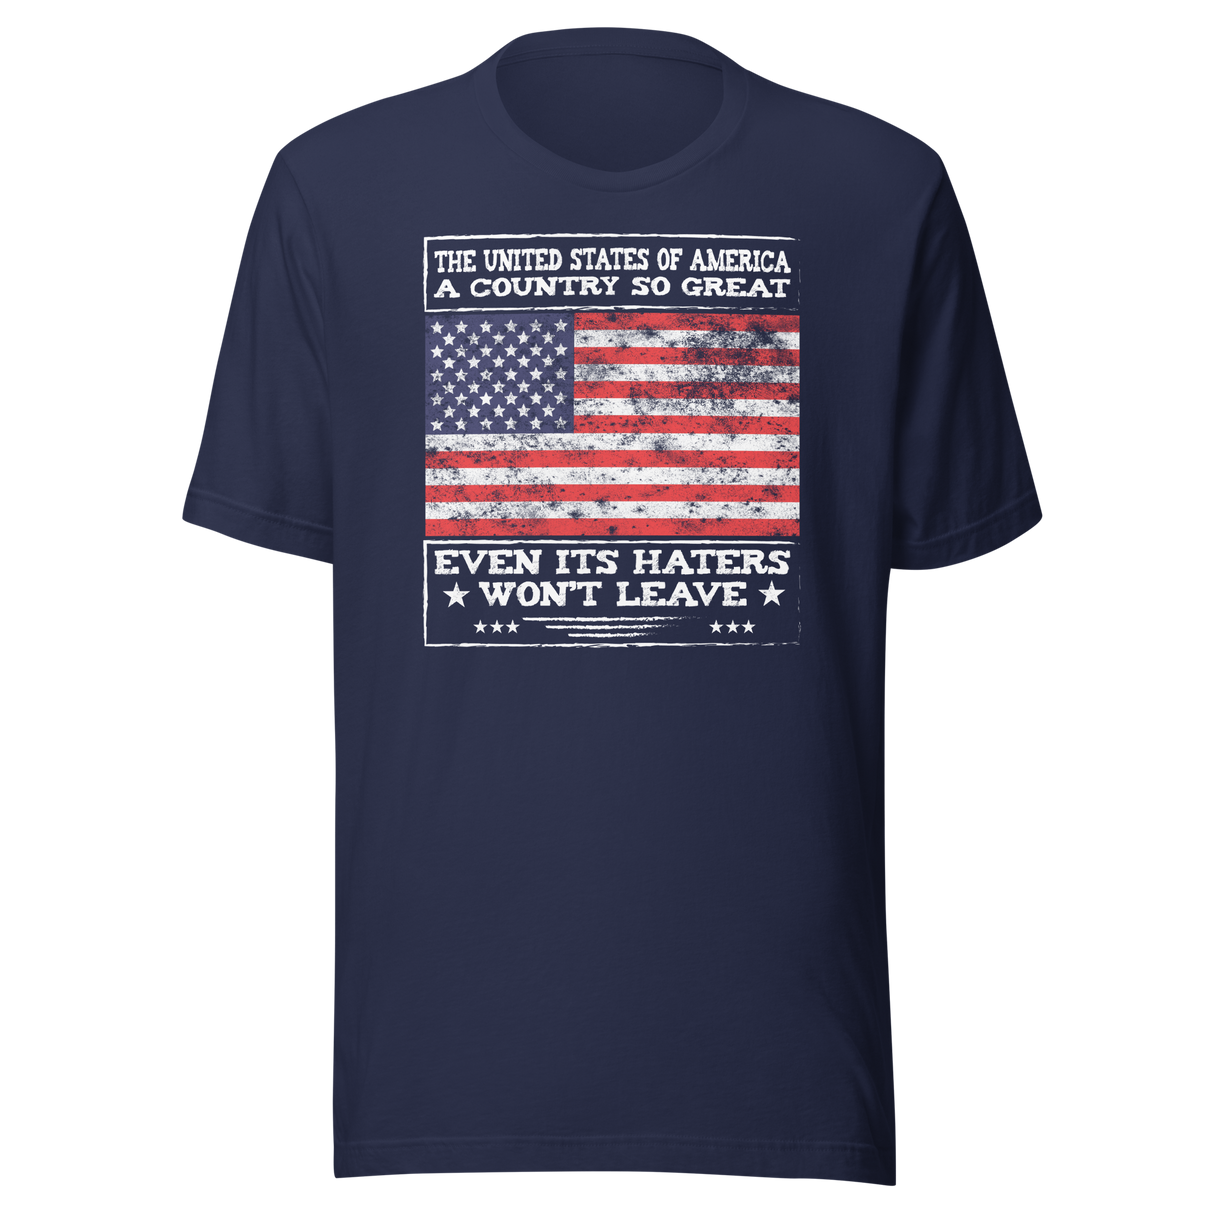 the-united-states-of-america-a-country-so-great-even-its-haters-wont-leave-politics-tee-politics-t-shirt-united-states-tee-patriotism-t-shirt-humor-tee#color_navy